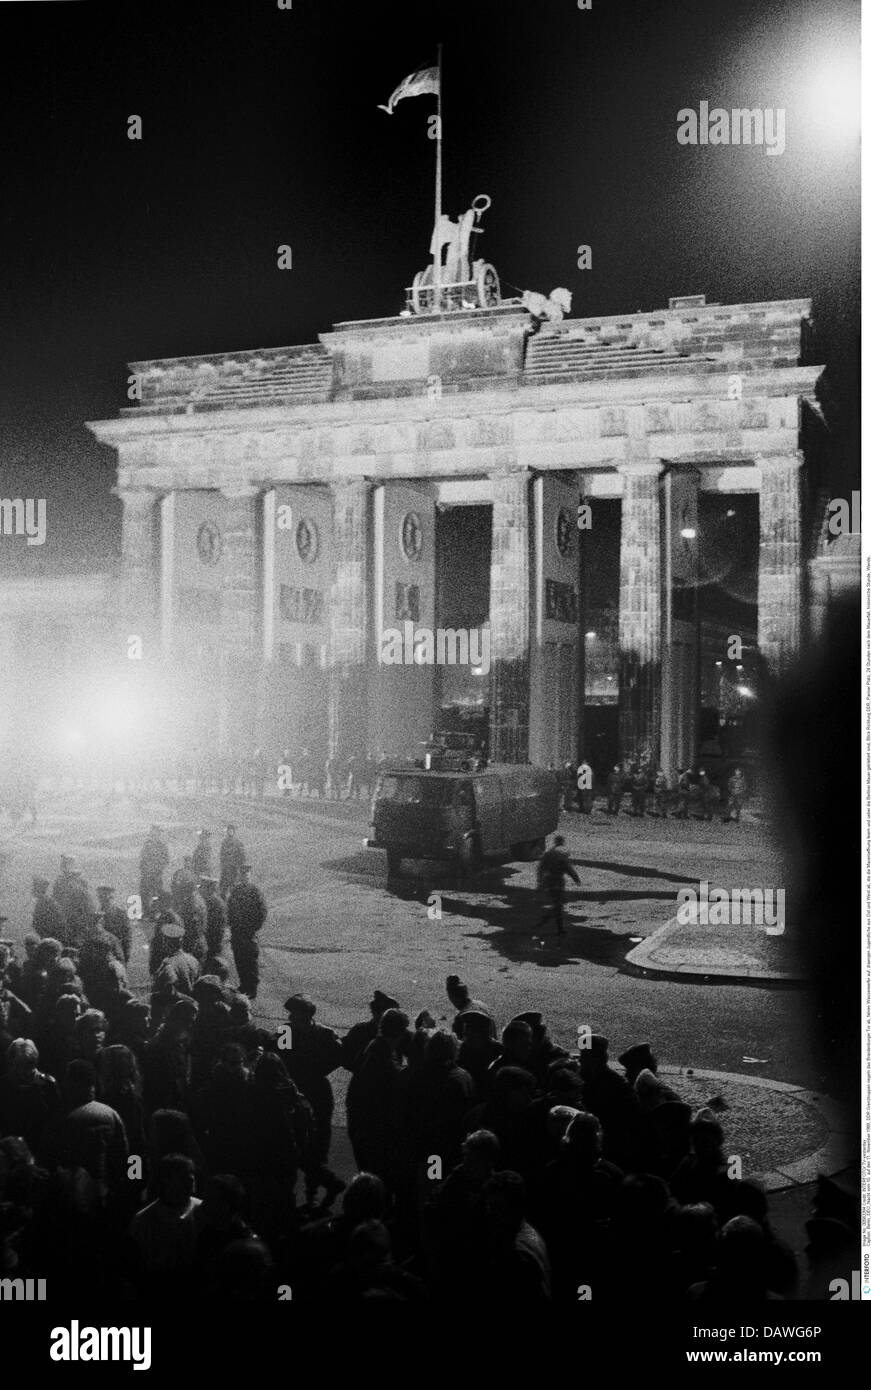 geography / travel, Germany, reunification, Berlin, Berlin Wall, GDR border troops controlling the Brandenburg Gate with watercannon cars, night shot, 10. / 11.11.1989, East Germany, historic, historical, East-Germany, 20th century, 1980s, 80s, Pariser Platz, Brandenburger Tor, square, celebration, people, celebrating, 24 hours after the fall, down, opening, turn of events, history, freedom, crossing, November'89, November 89, border patrol, Additional-Rights-Clearences-Not Available Stock Photo